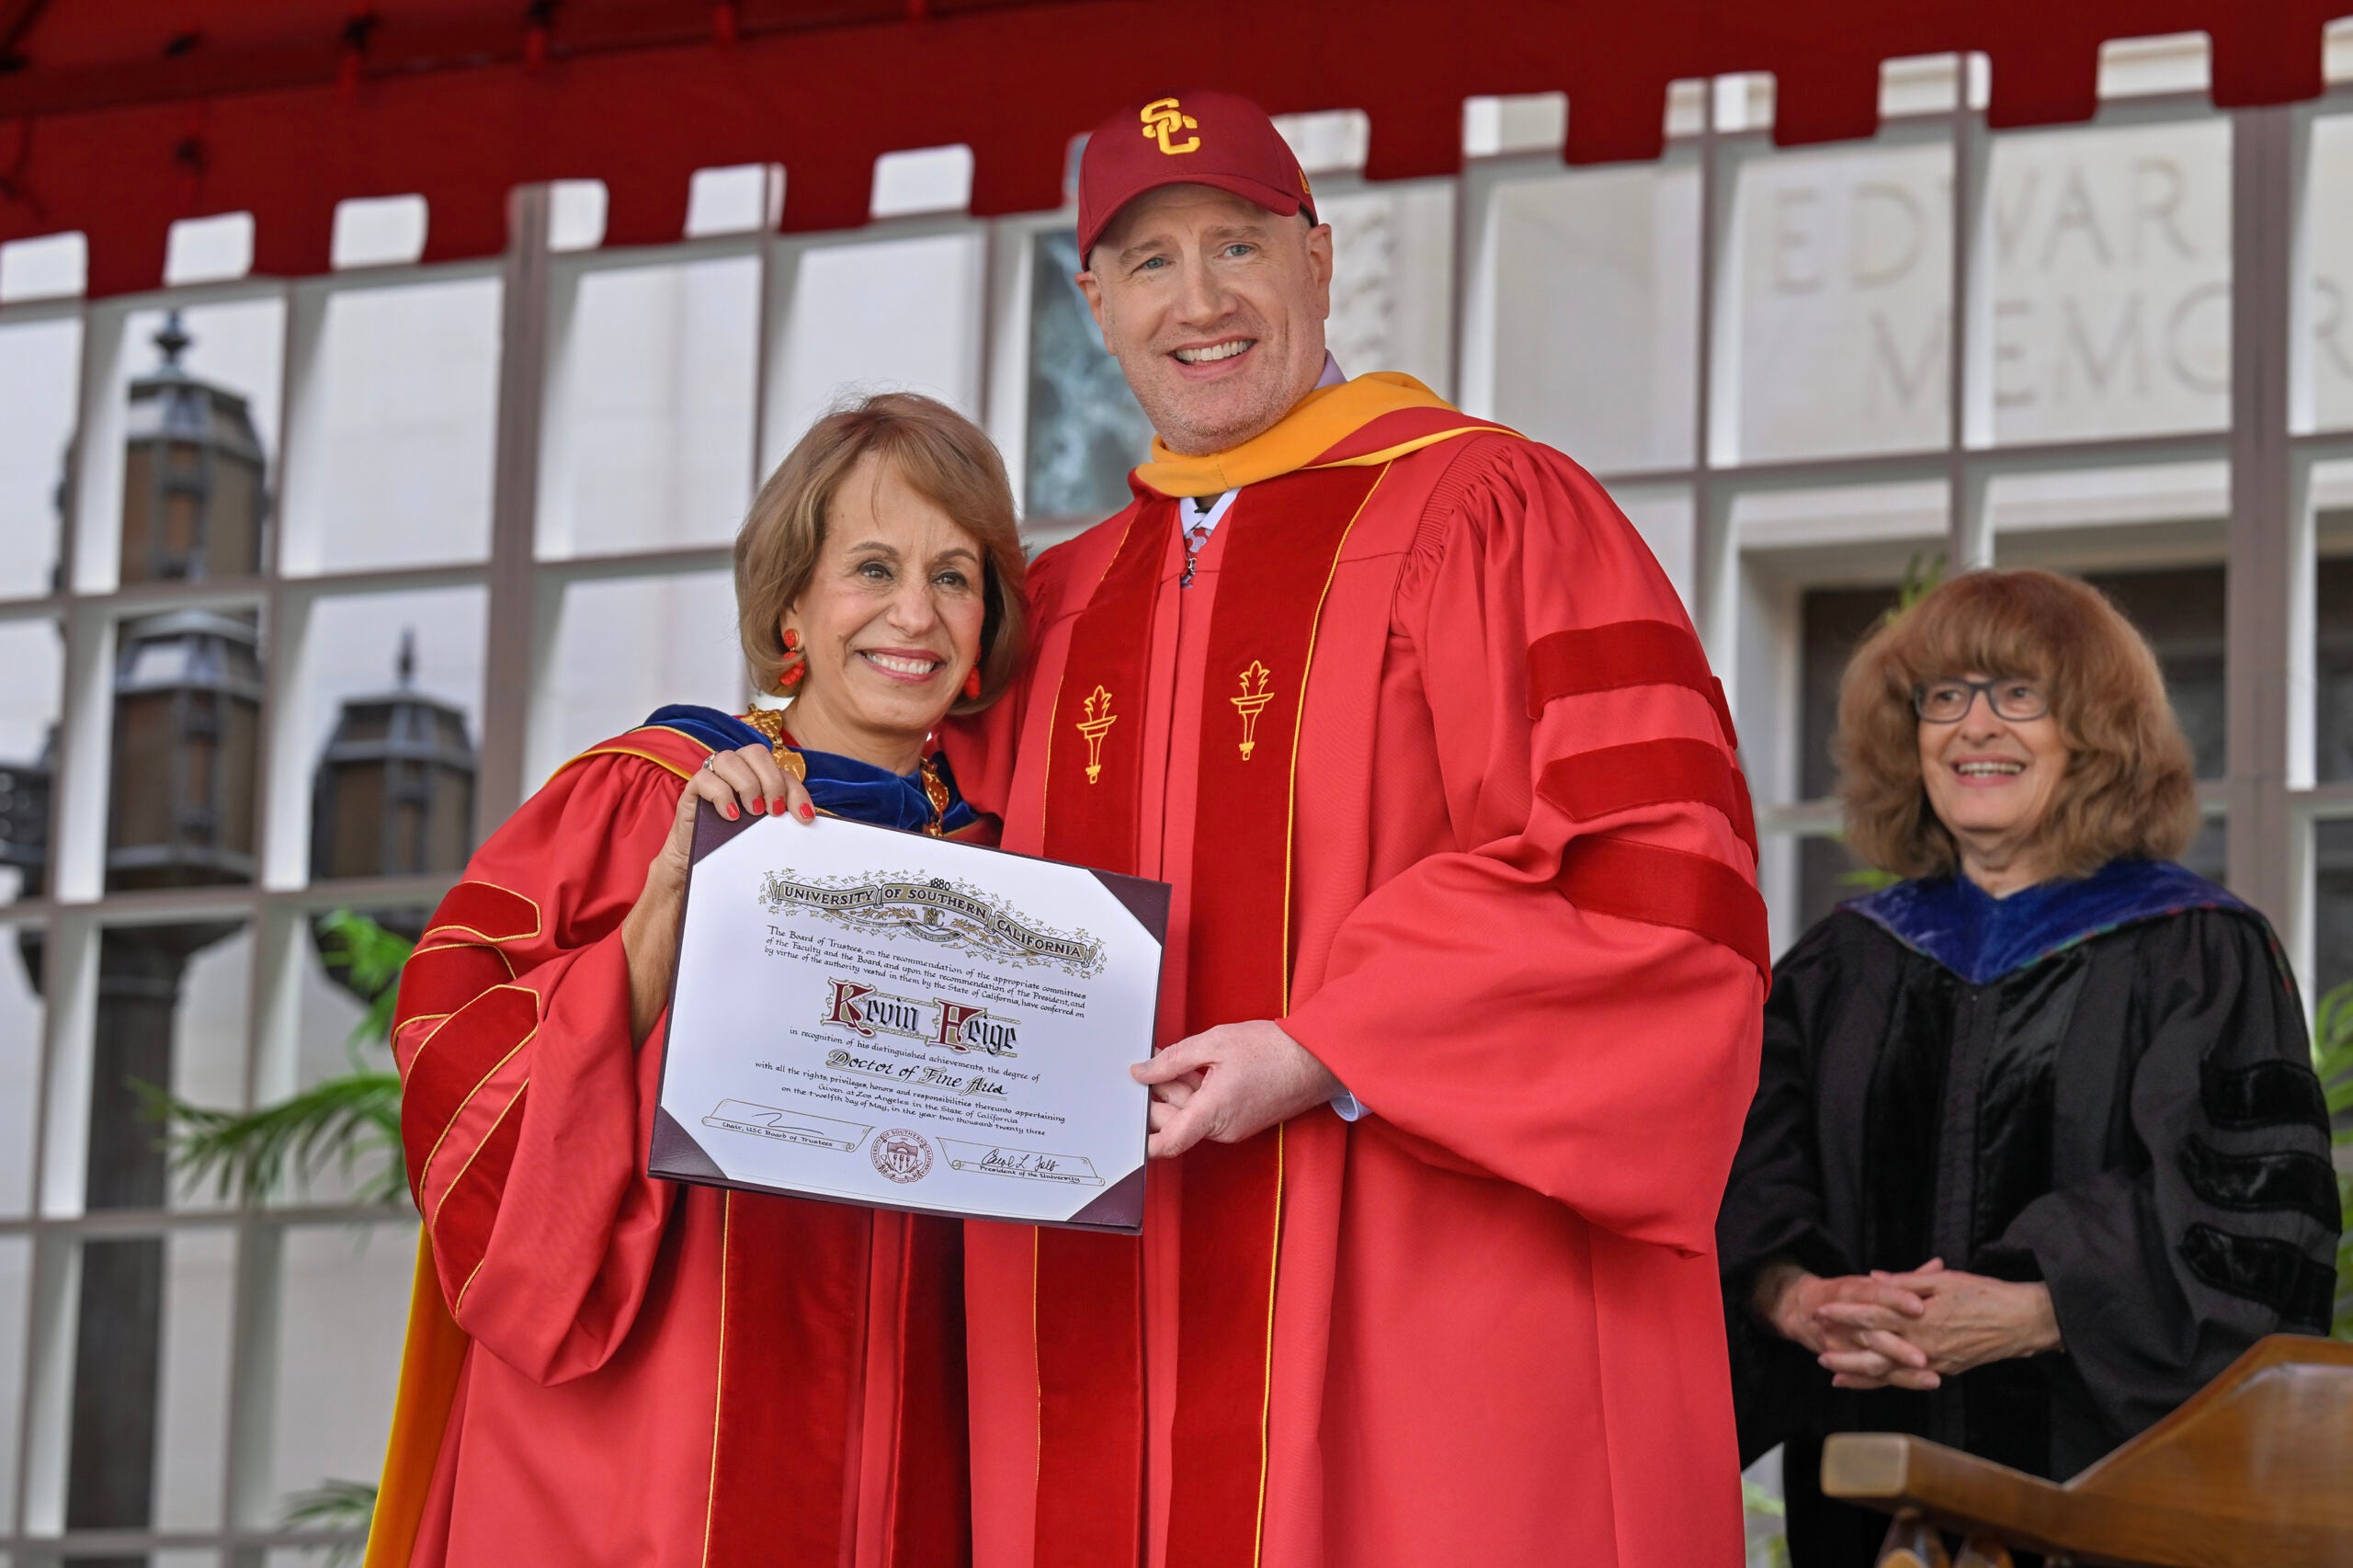 Marvel Studio boss Kevin Feige is presented with a doctor of fine arts by USC President Carol L. Folt during the 140th commencement ceremony at the University of Southern California, May 12, 2023. (Photo/Gus Ruelas)